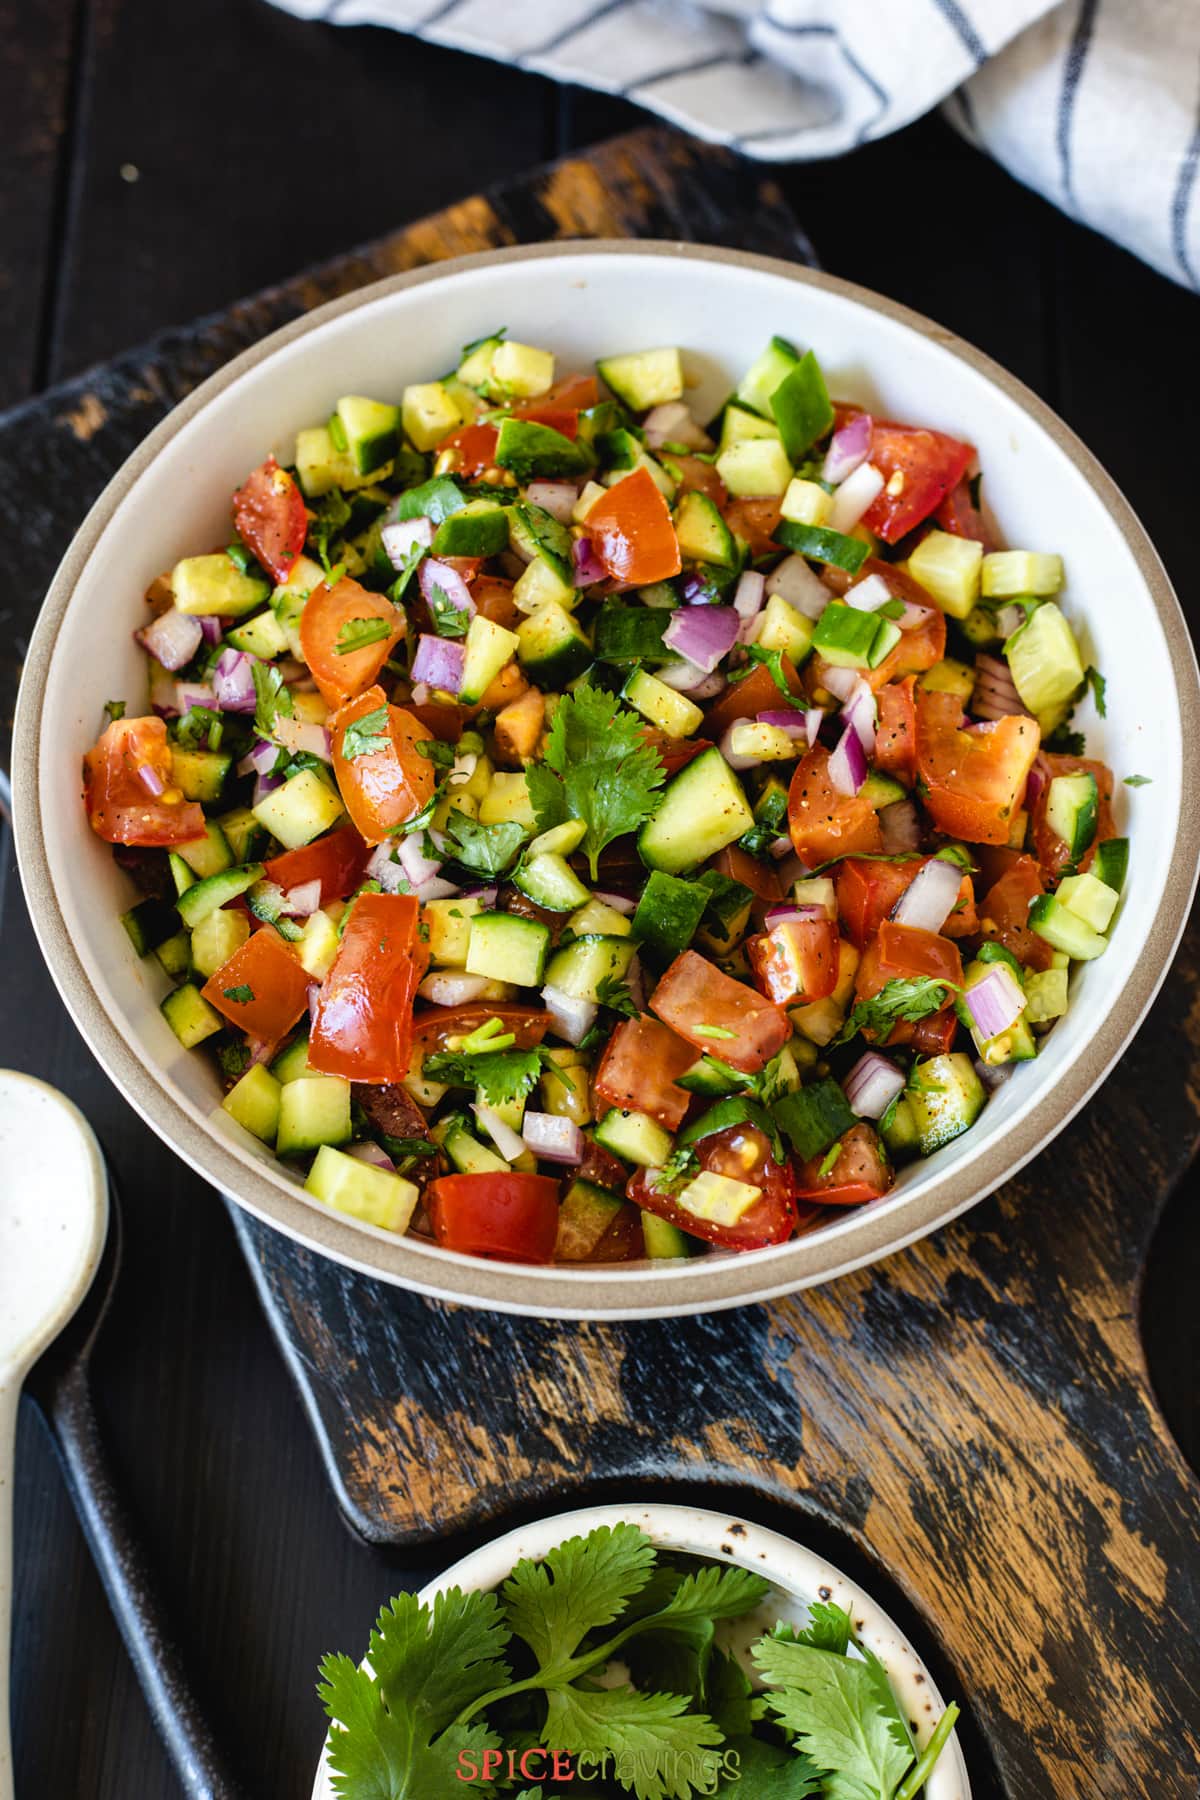 chopped salad made of cucumber, tomato, onion and cilantro